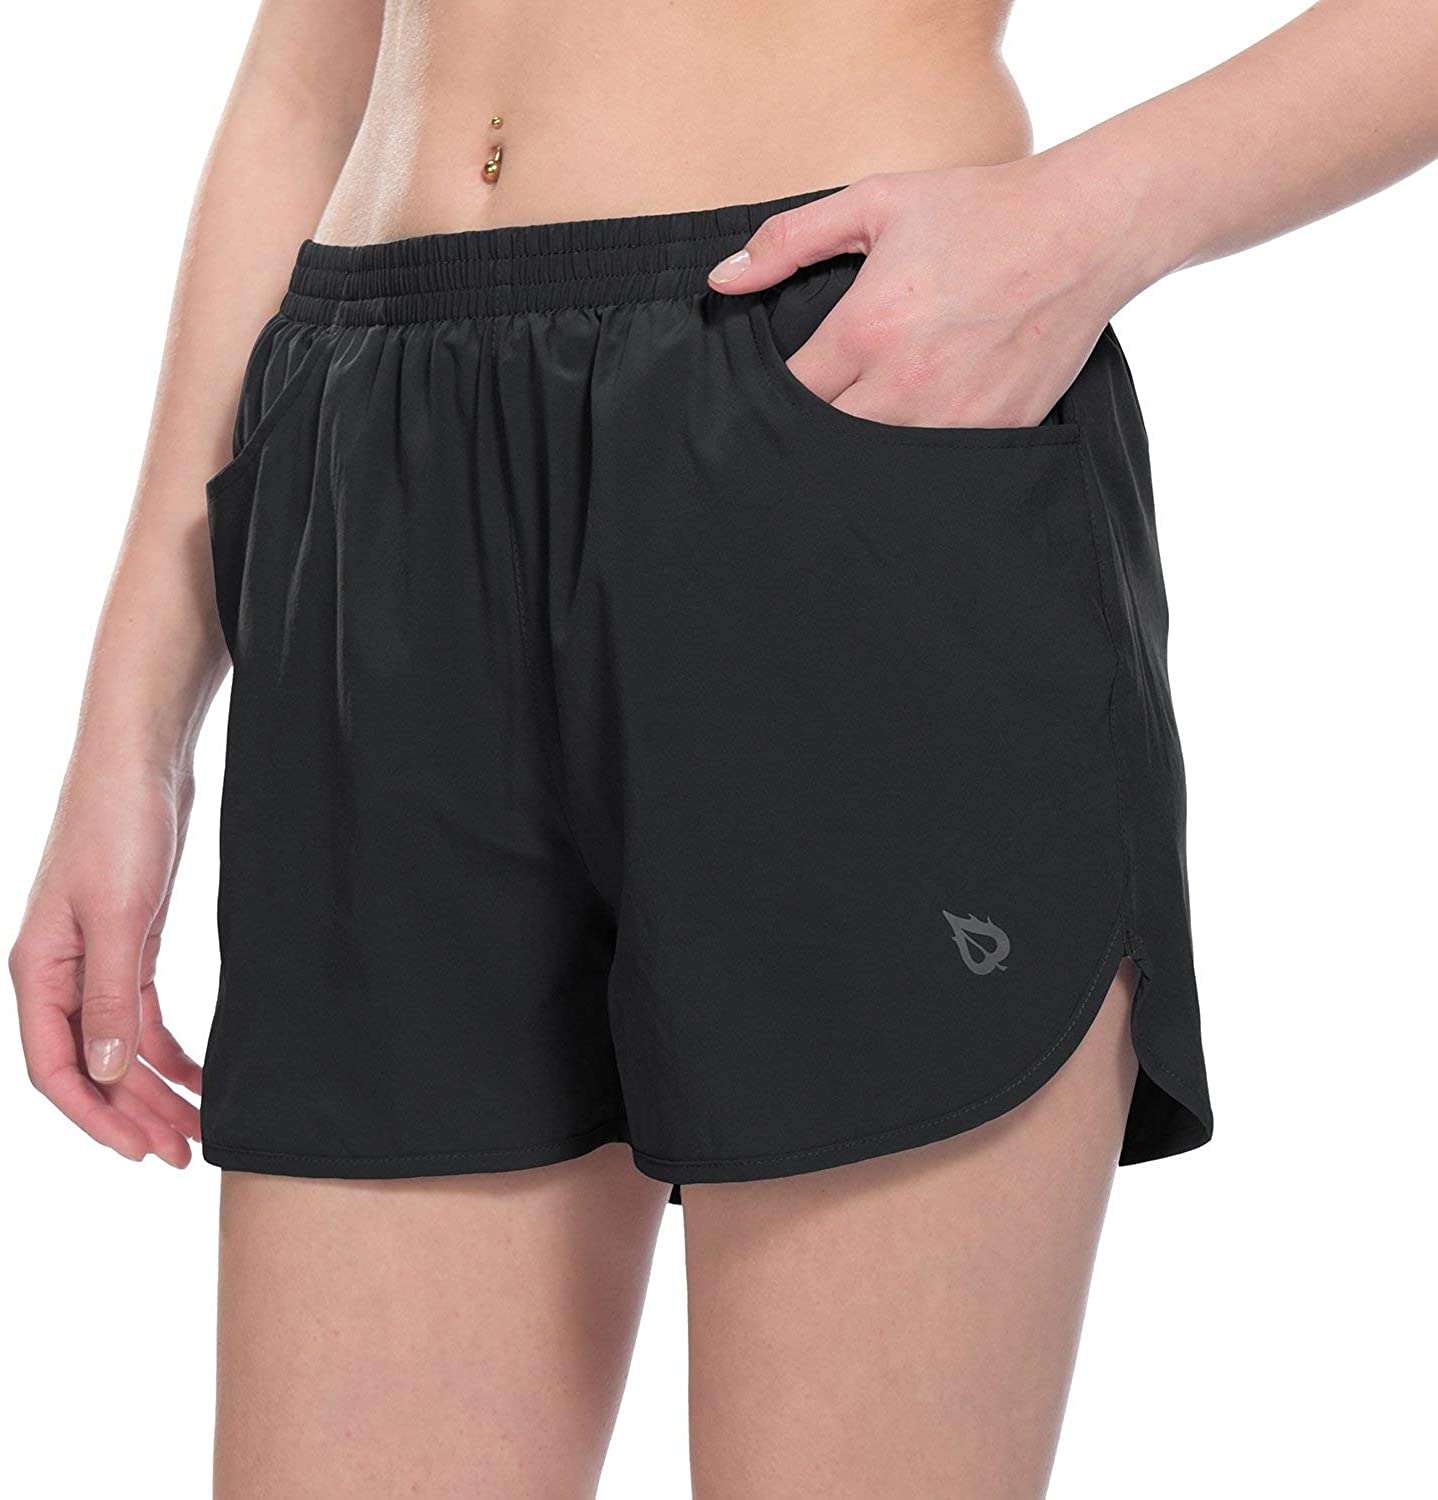 BALEAF Women's 3 Running Shorts Quick Dry No Liner Athletic